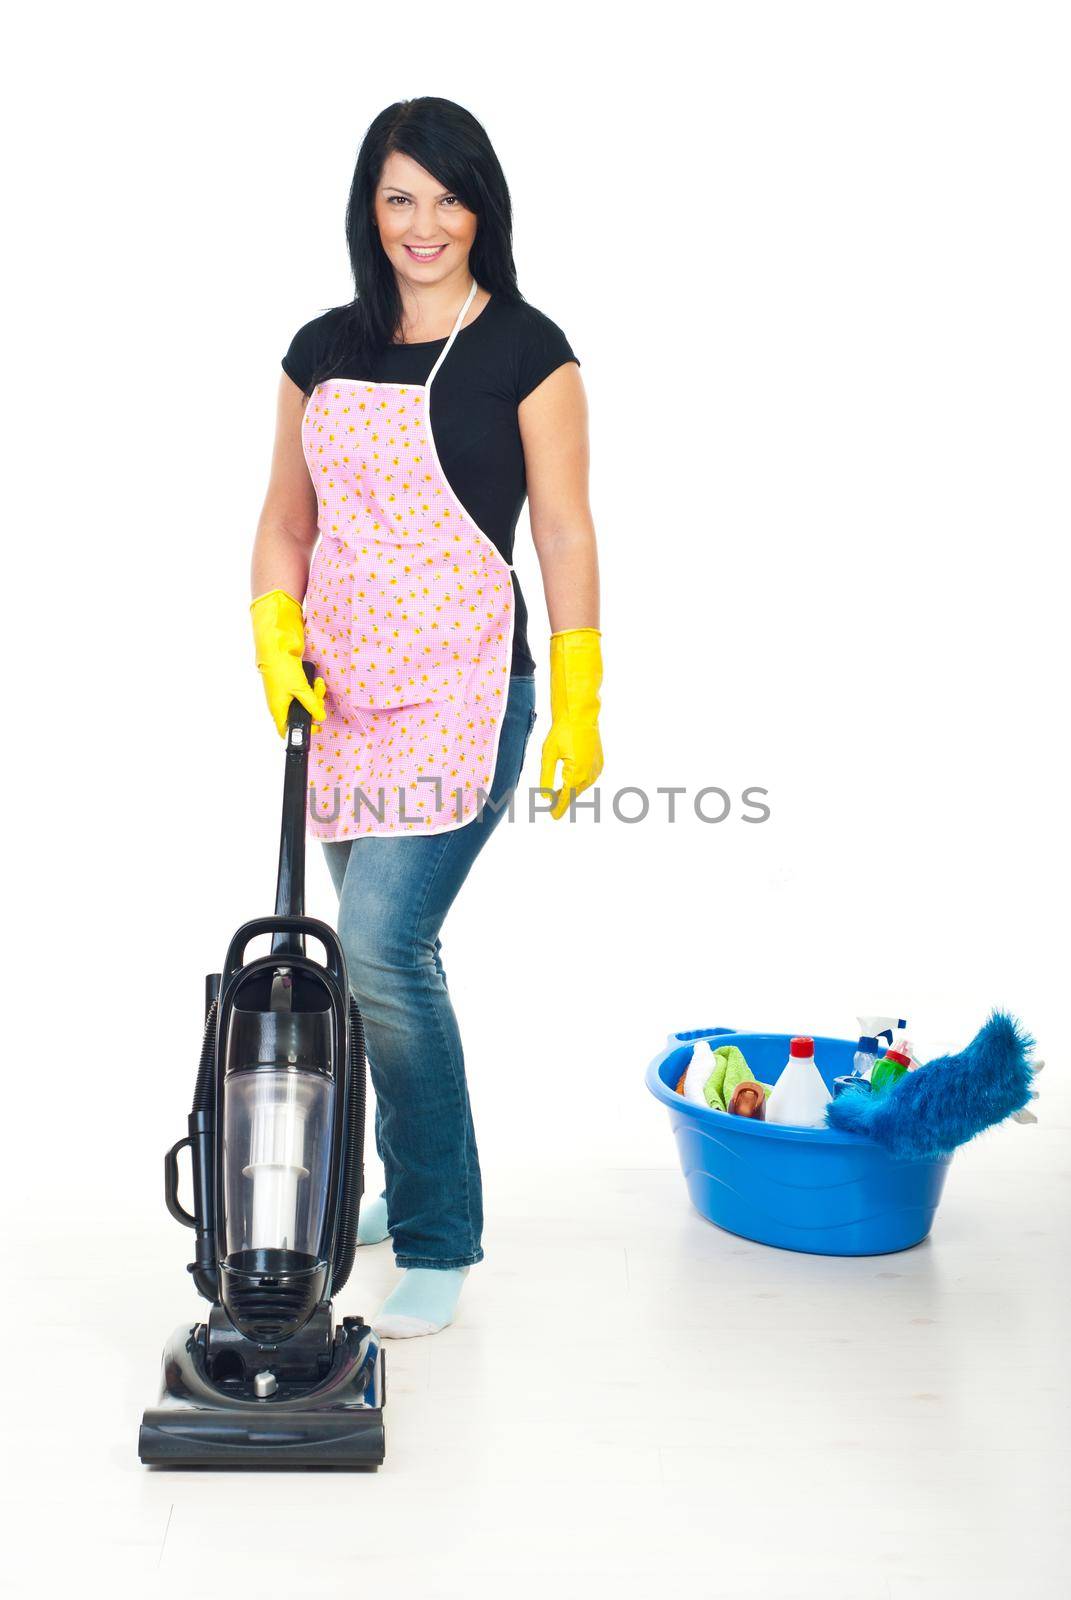 Cute brunette woman with pink apron using vacuum cleaner on floor in her home